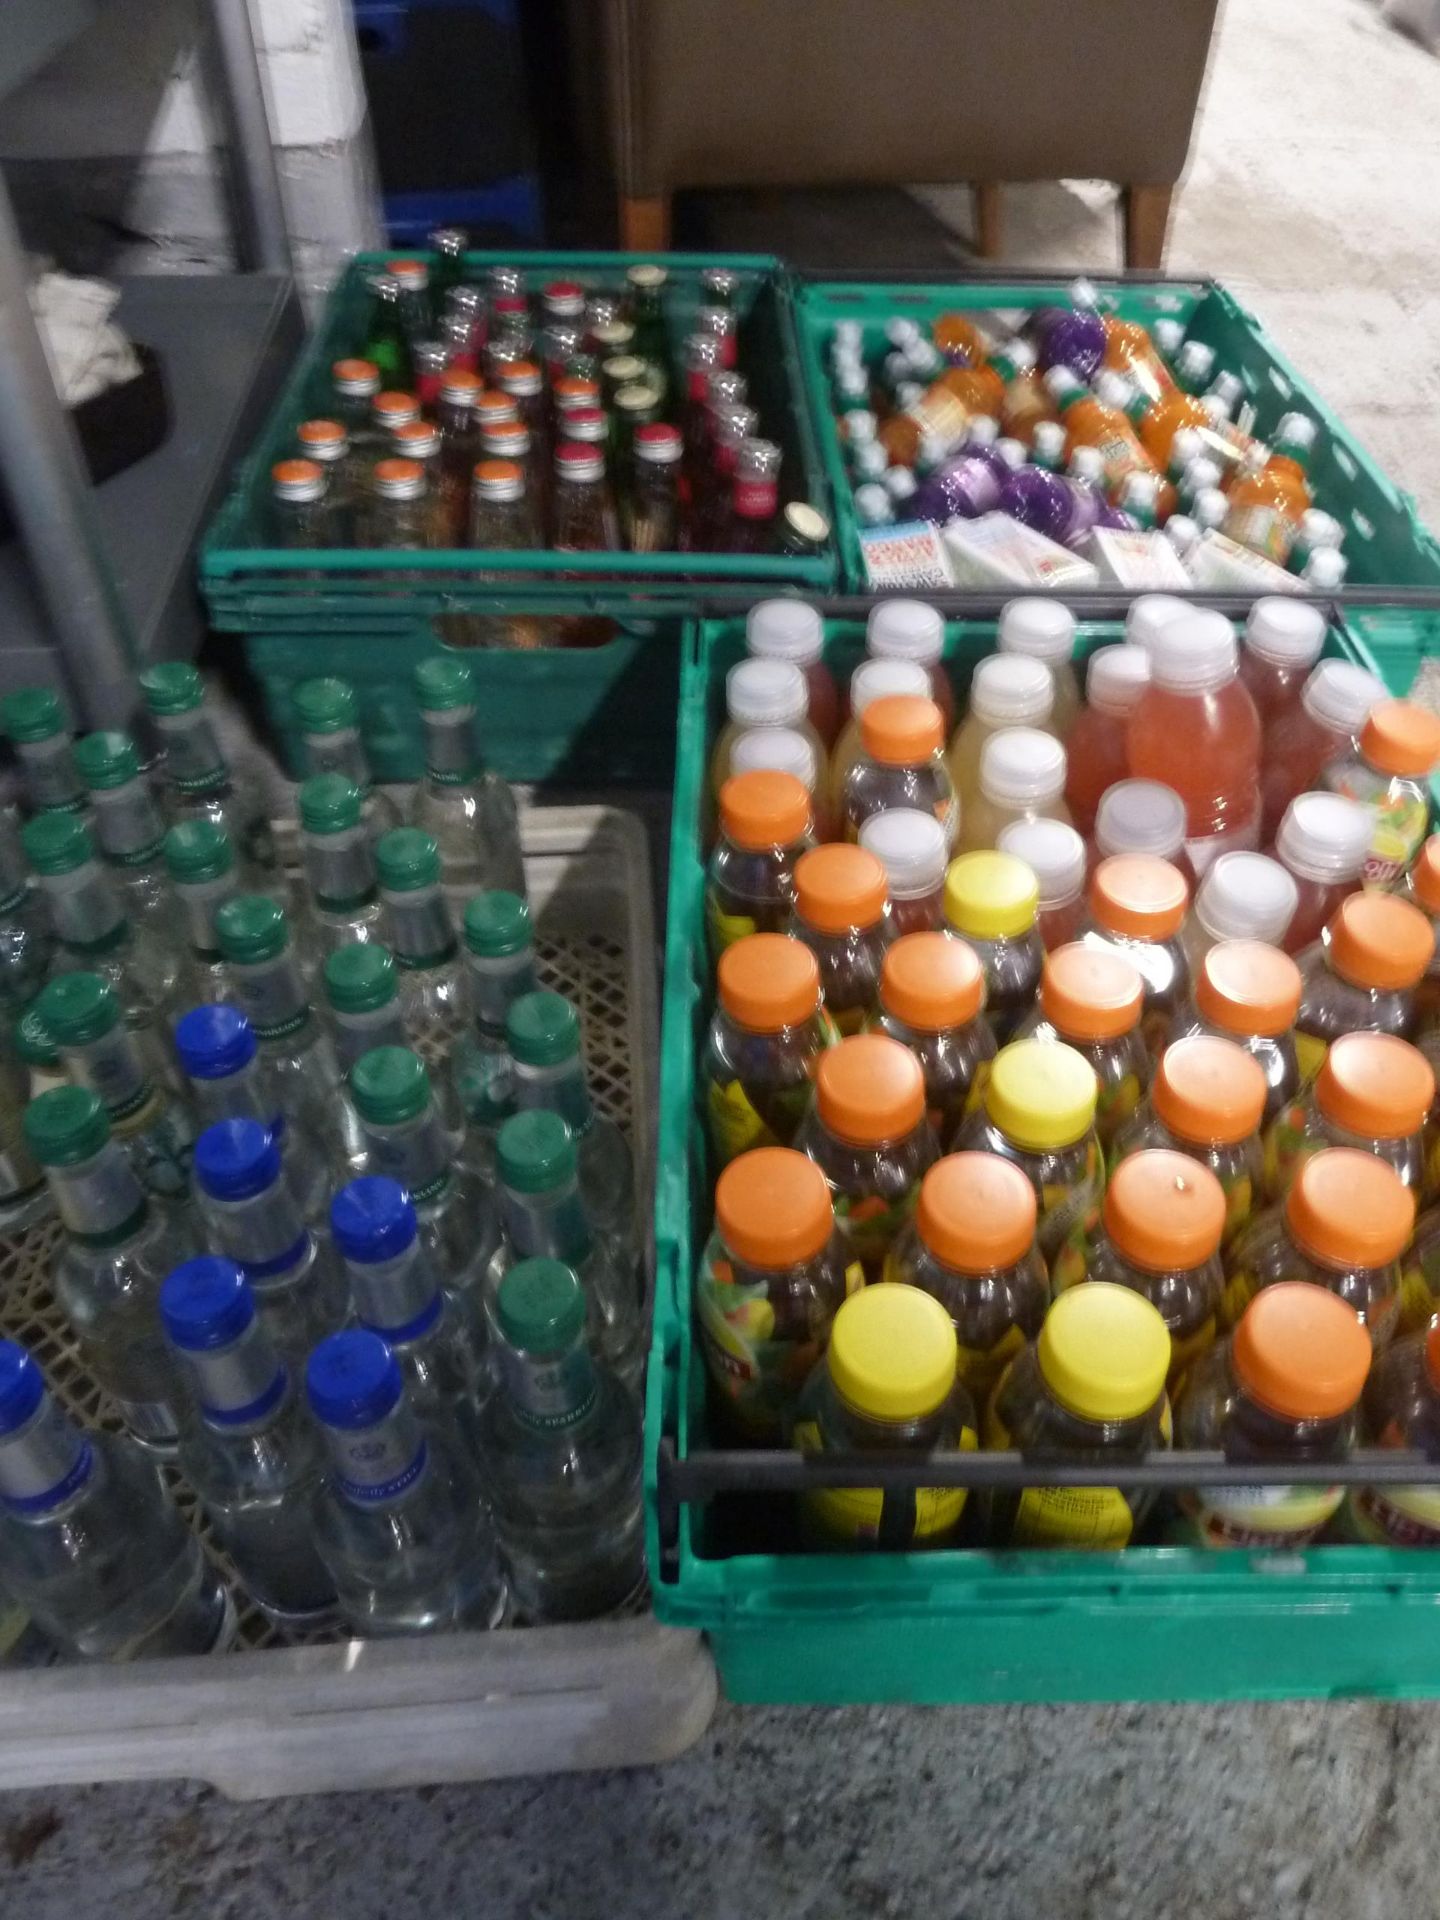 * large selection of soft drinks - 200+ items. Ice tea, bottled water, J2O's fruit shoots.